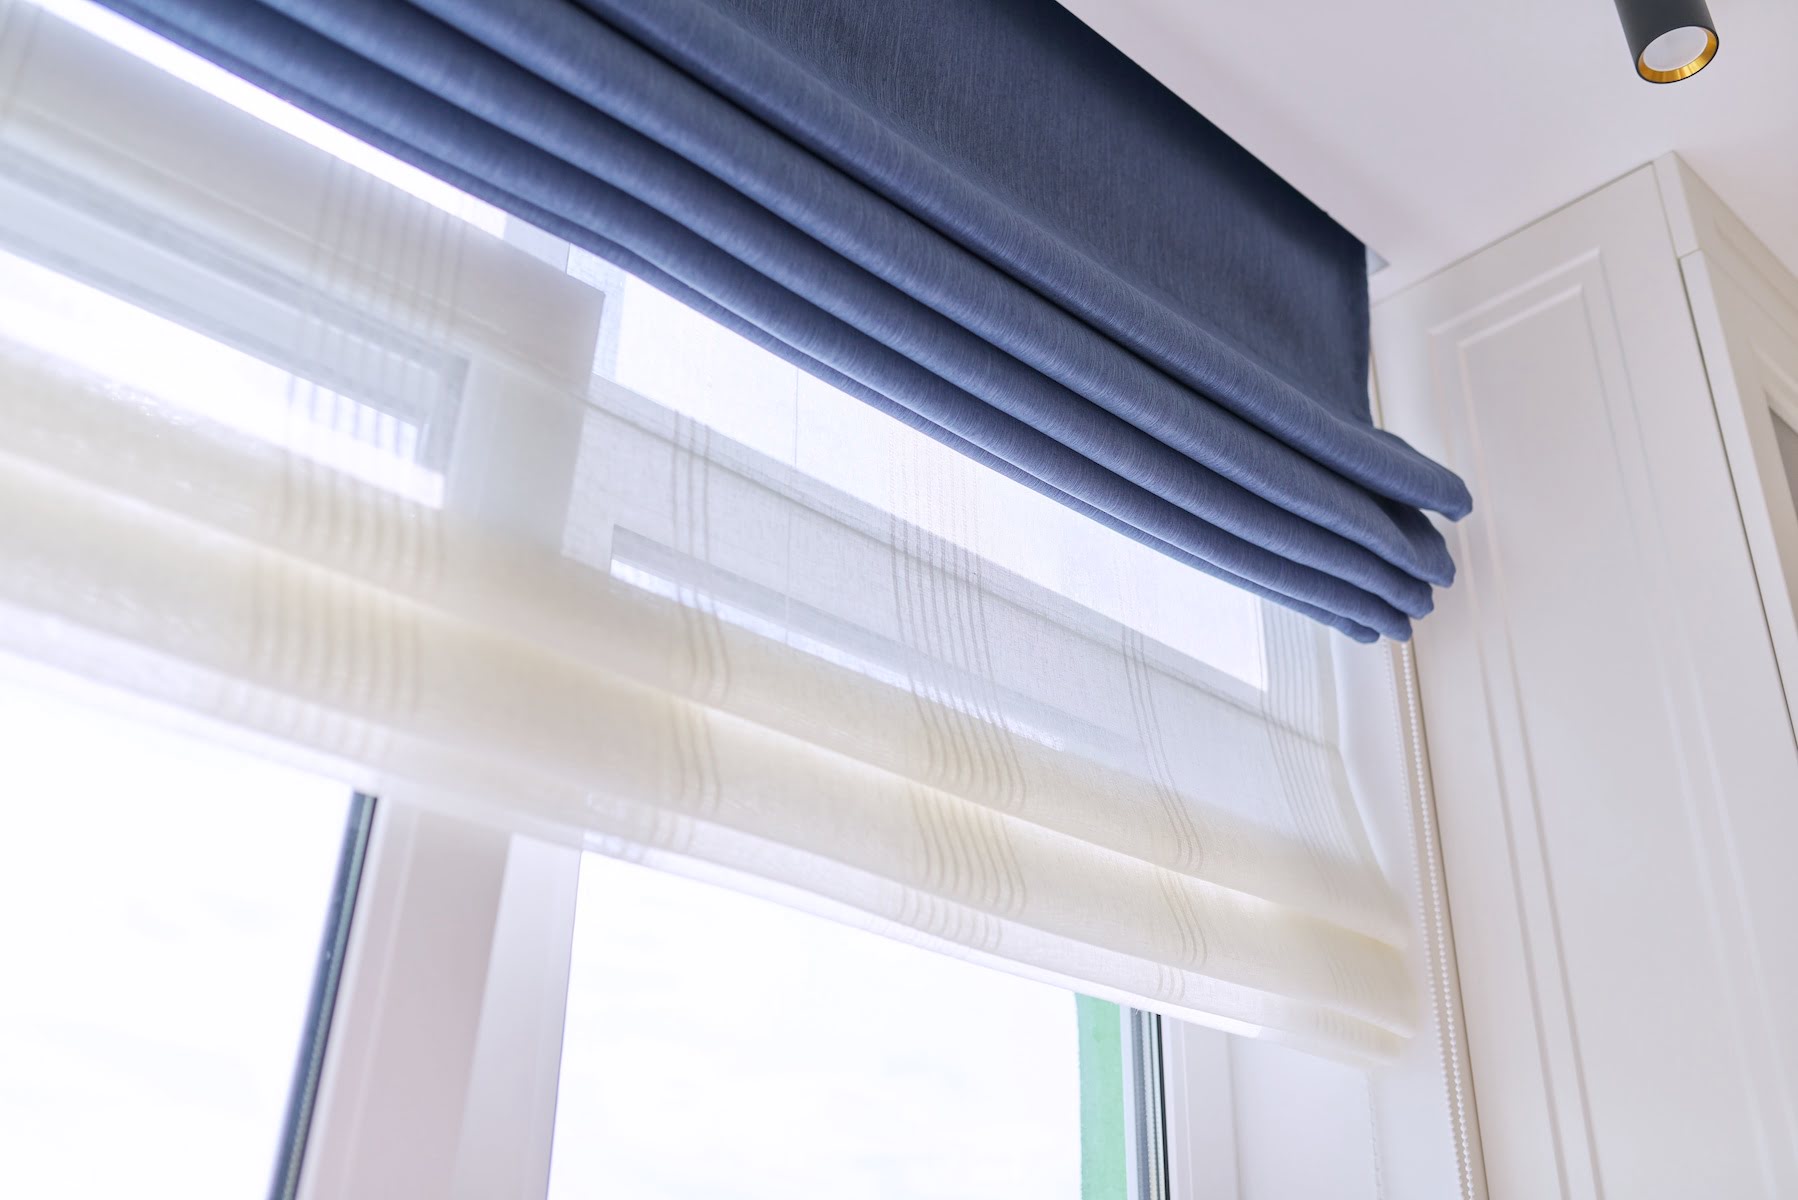 How To Make Roman Blinds